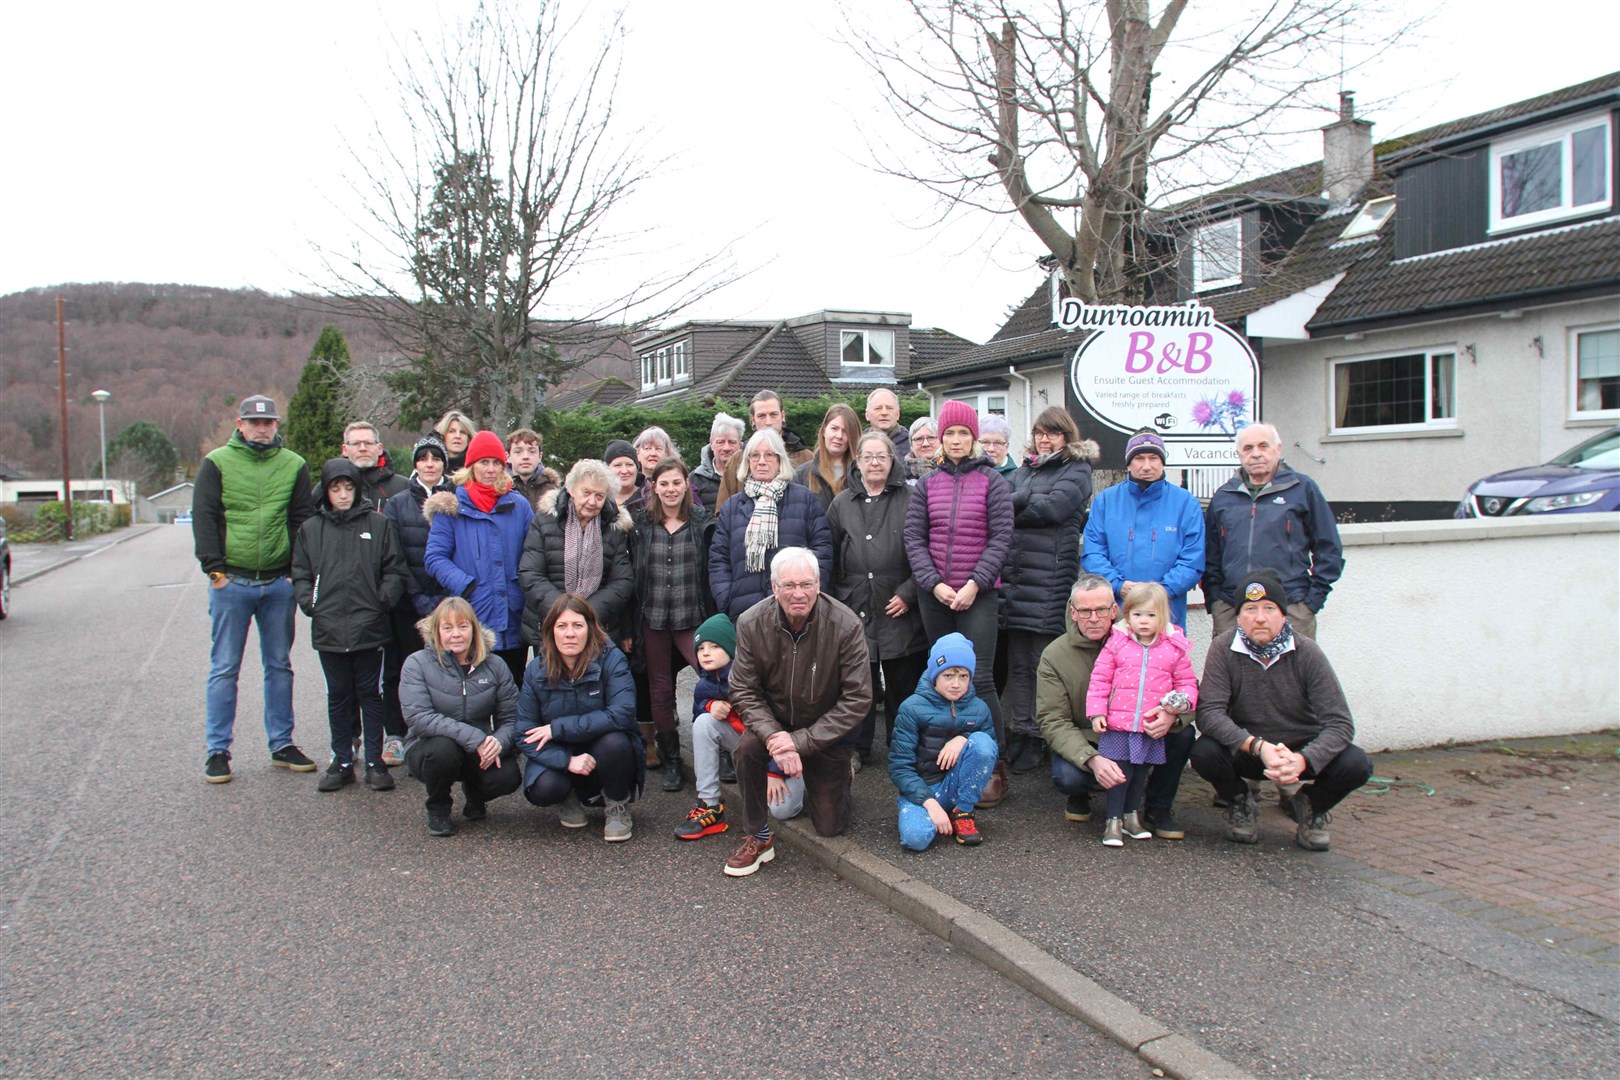 Some of the local residents opposed to the plans for the apartments pictured by Dunroamin B&B at the start of the year.